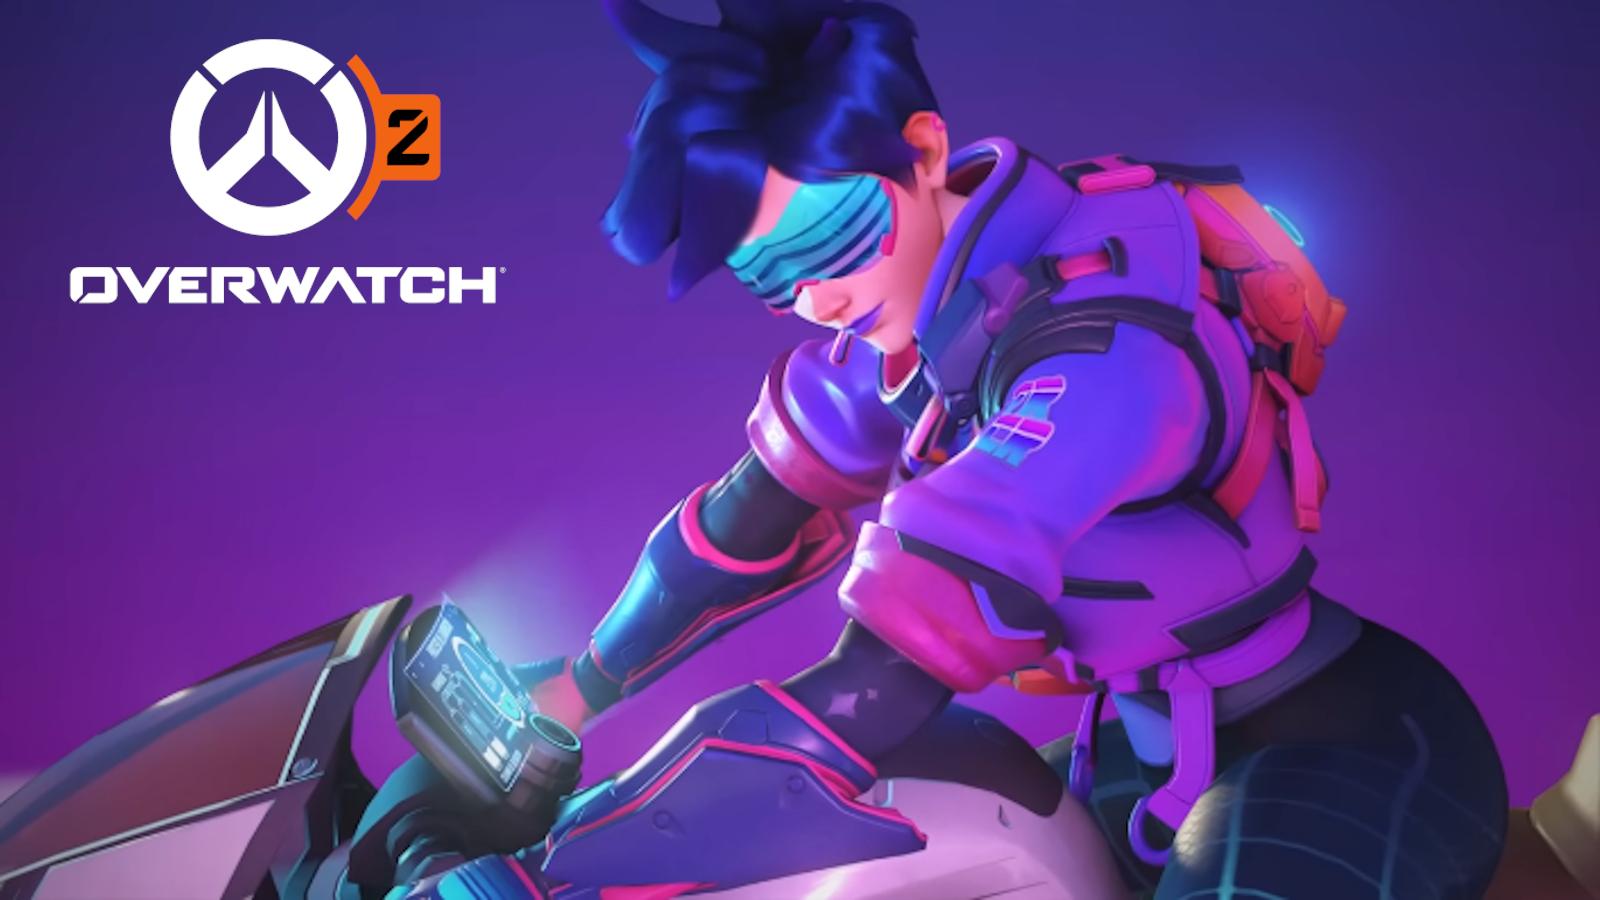 tracer on bike in ow2